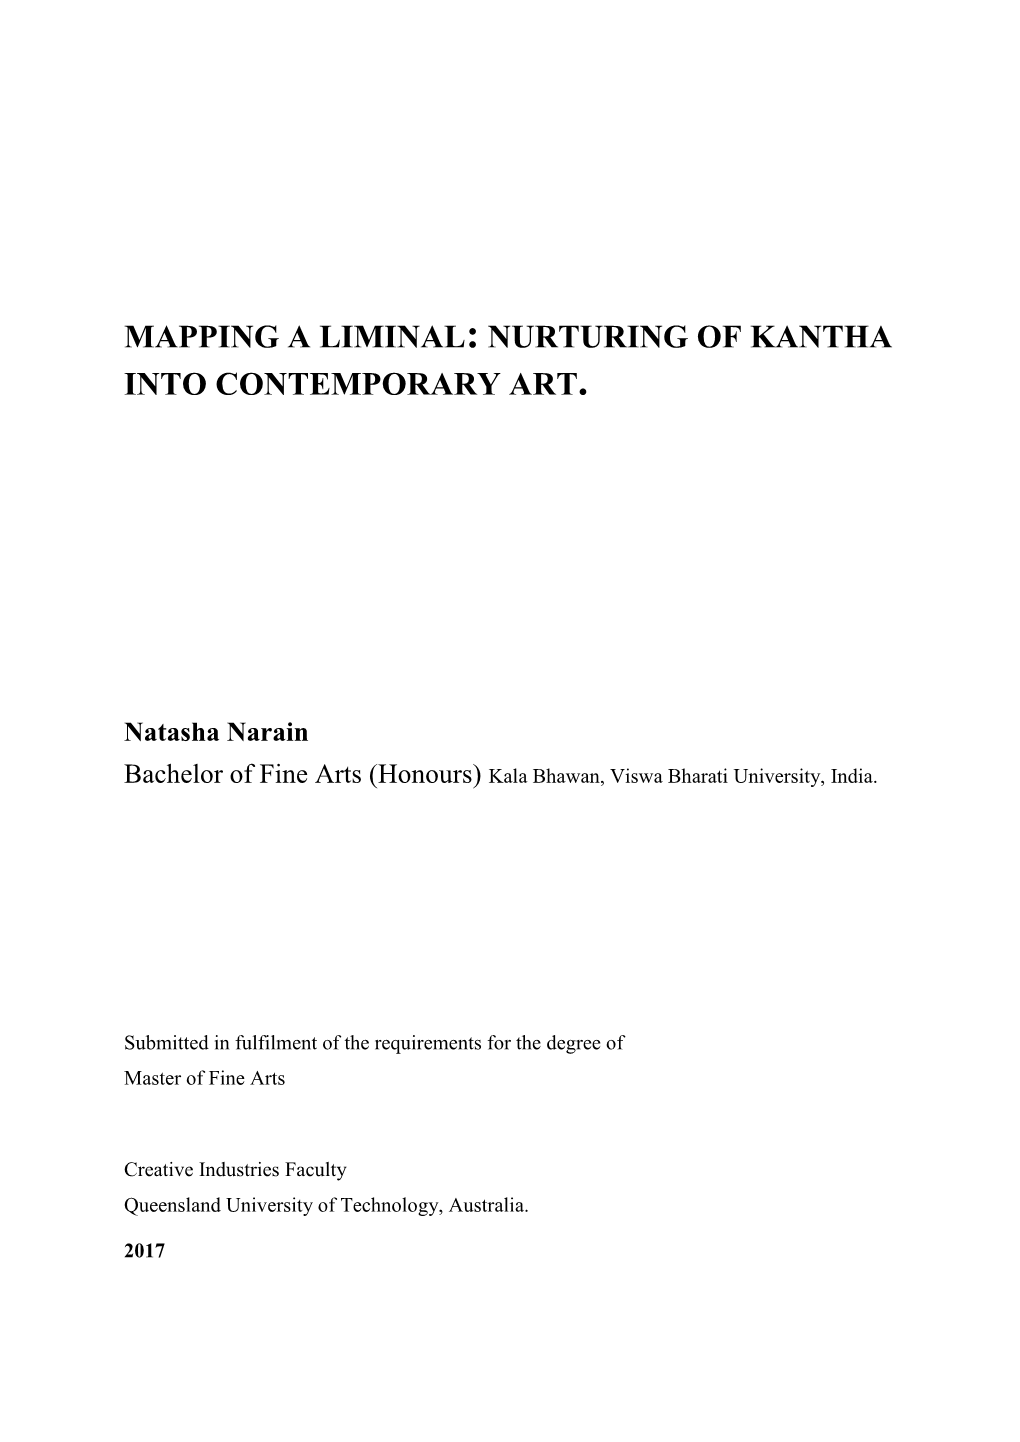 Mapping a Liminal: Nurturing of Kantha Into Contemporary Art